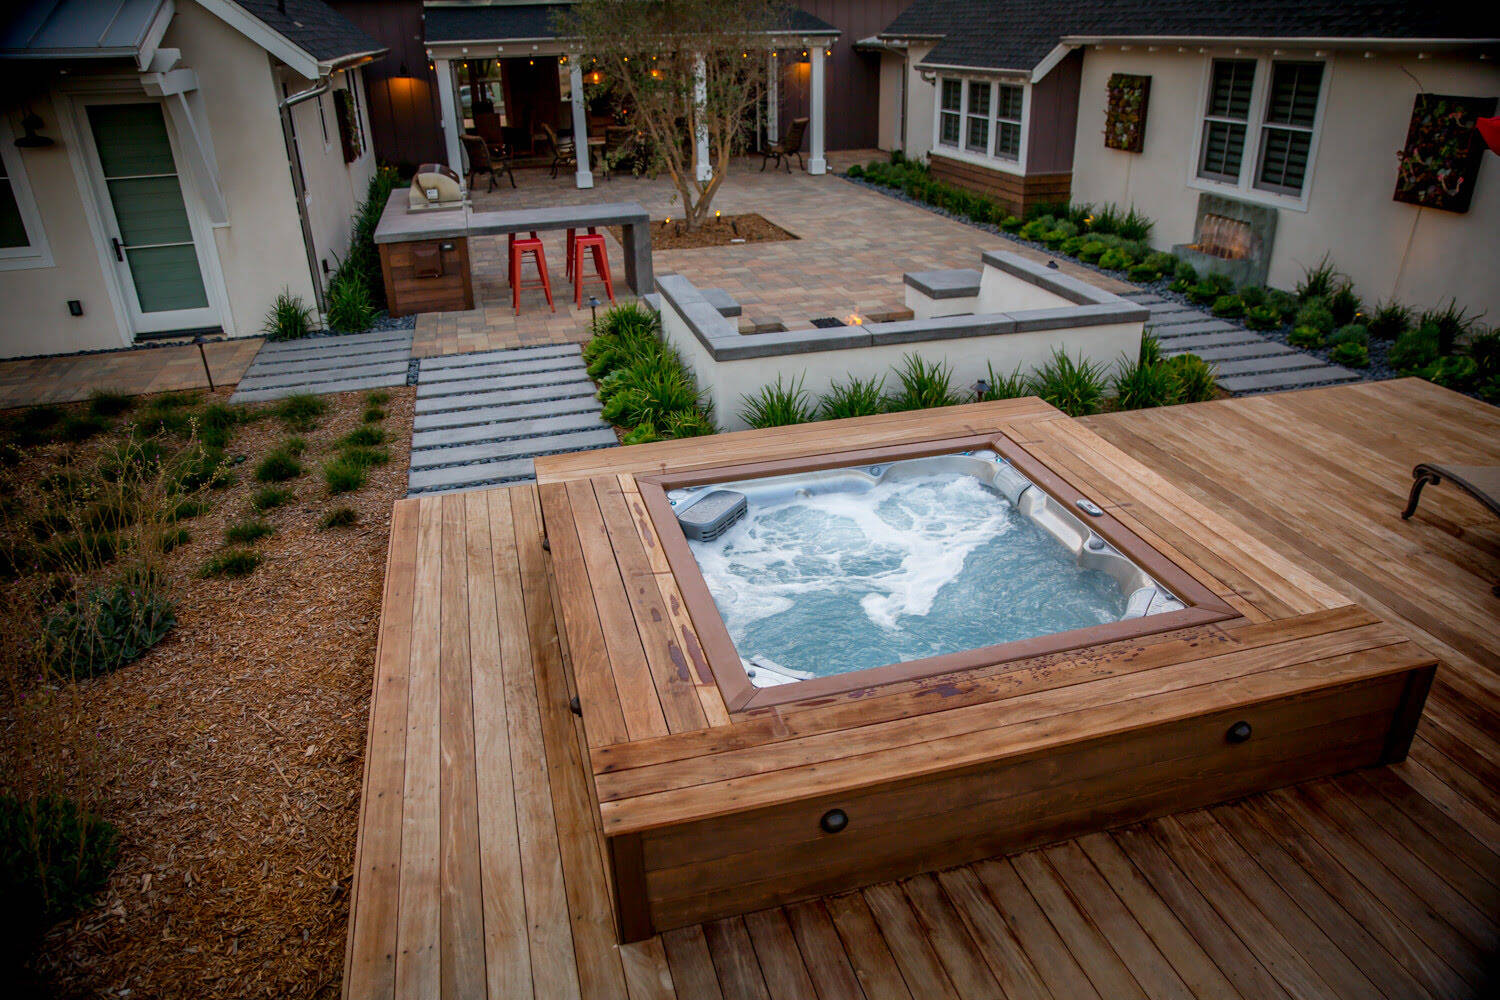 How To Build An Outdoor Hot Tub